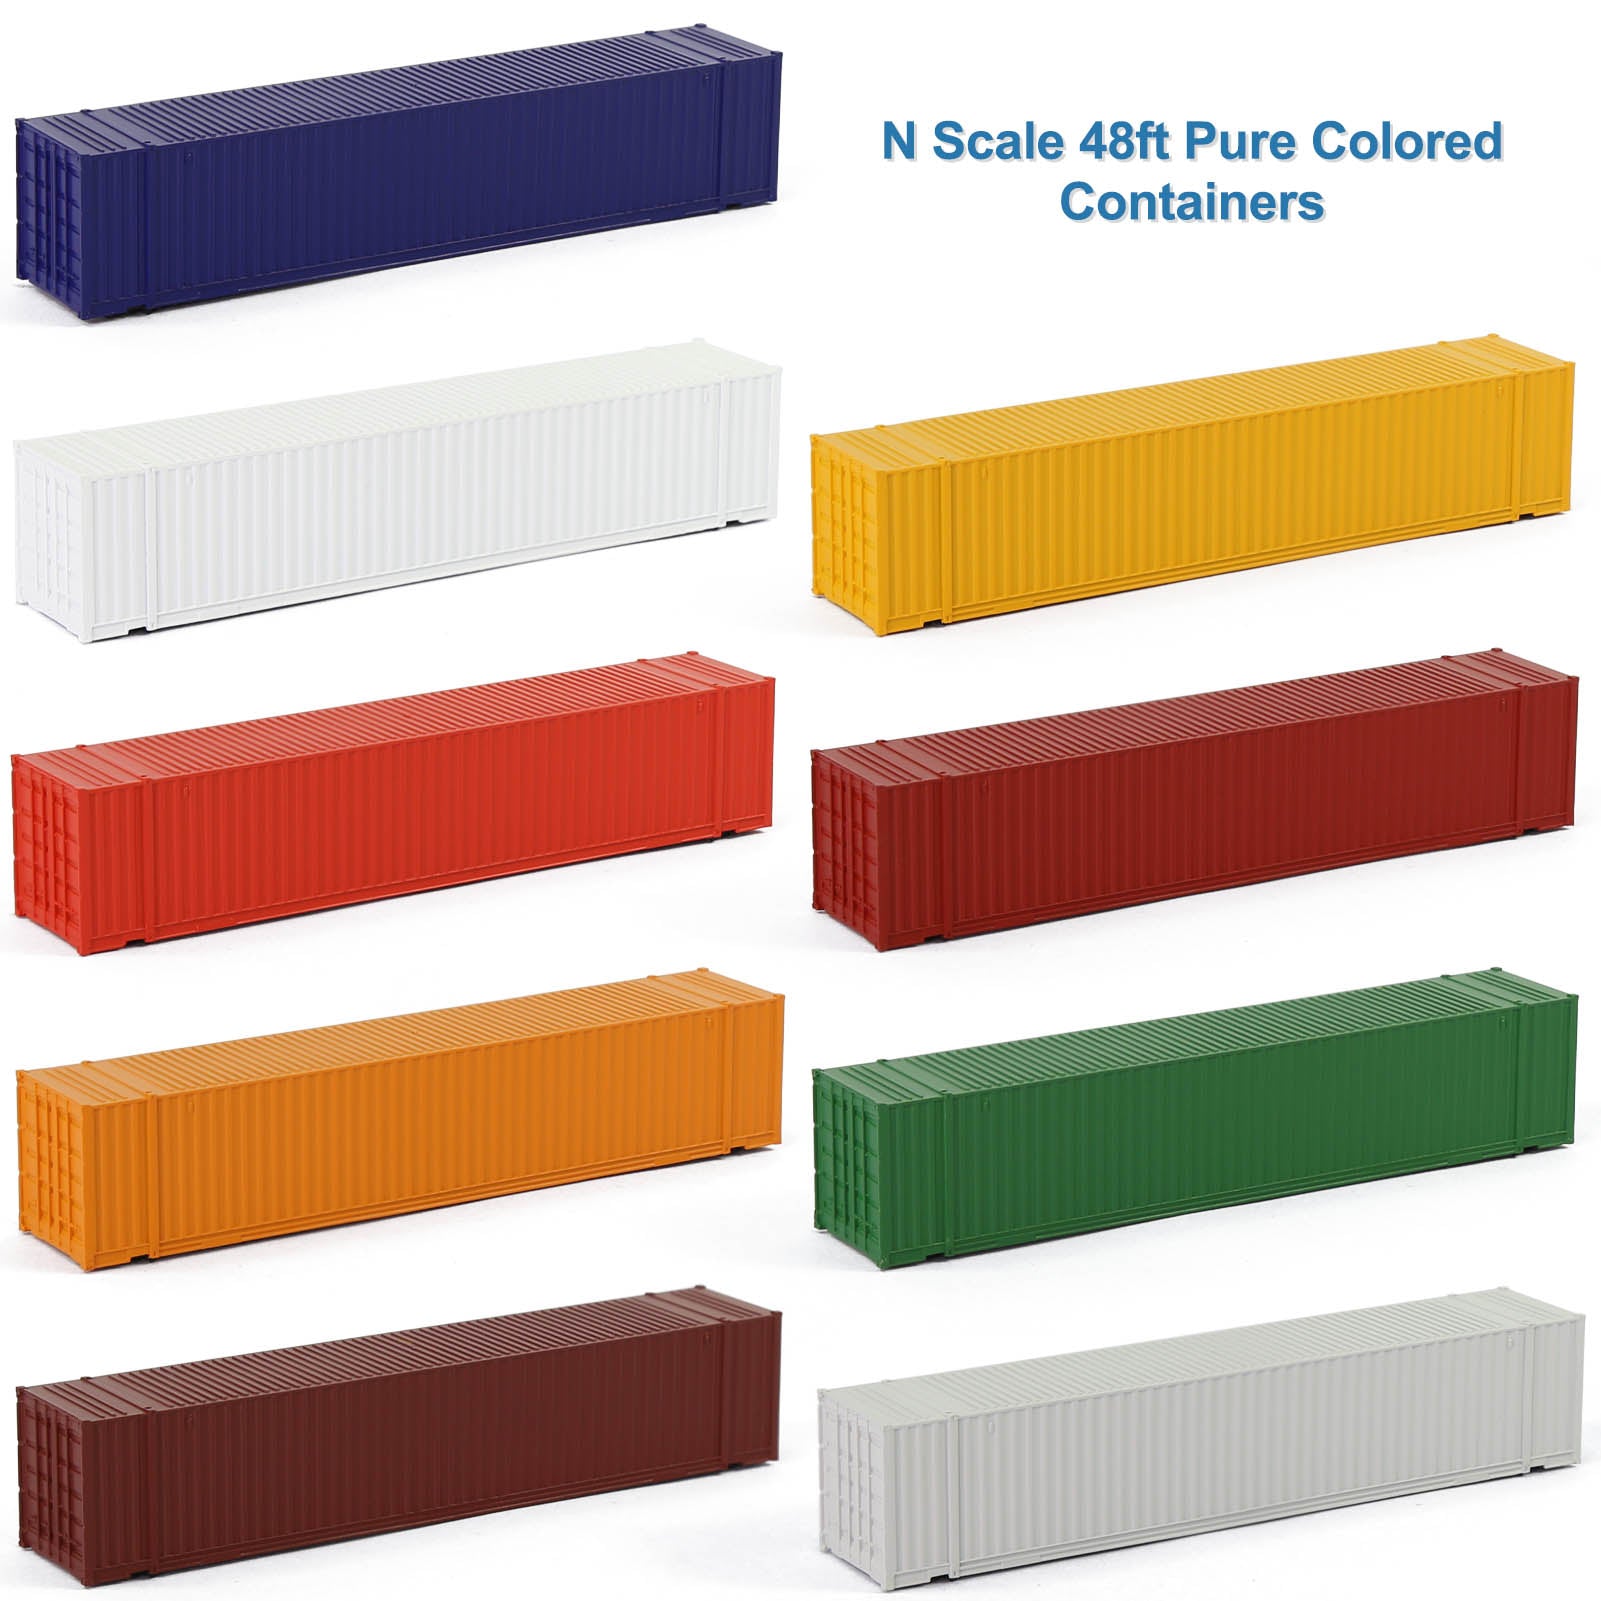 C15019 9pcs N Scale 1:160 Different Colored 48ft Blank Container Undecorated